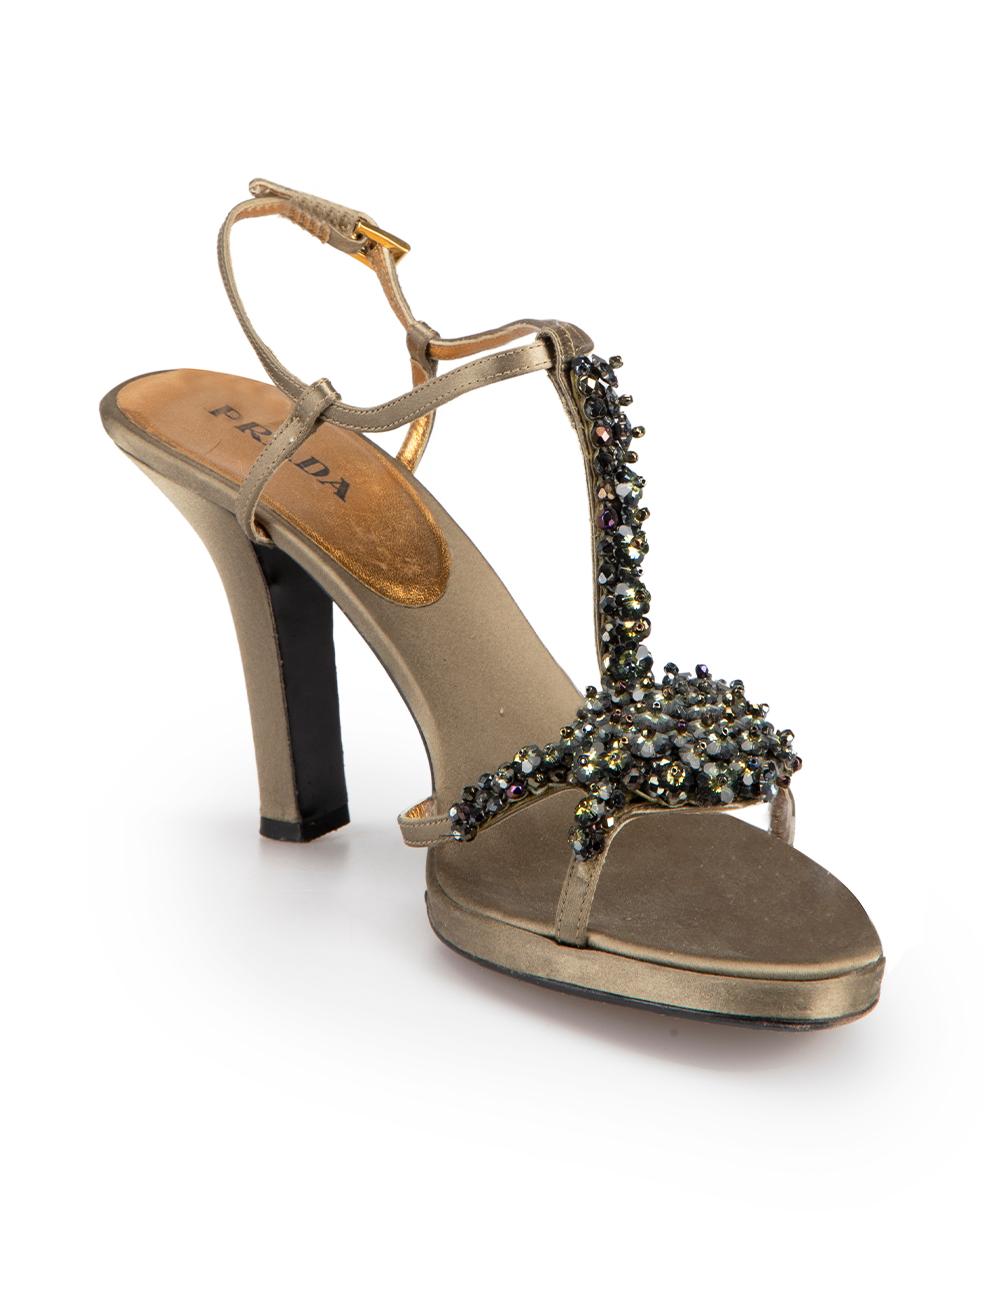 CONDITION is Good. Minor wear to shoes is evident. Light wear to both platforms with pulls to the weave and left-shoe toe with small marks on this used Prada designer resale item.



Details


Khaki

Silk satin

Heeled sandals

Floral bead